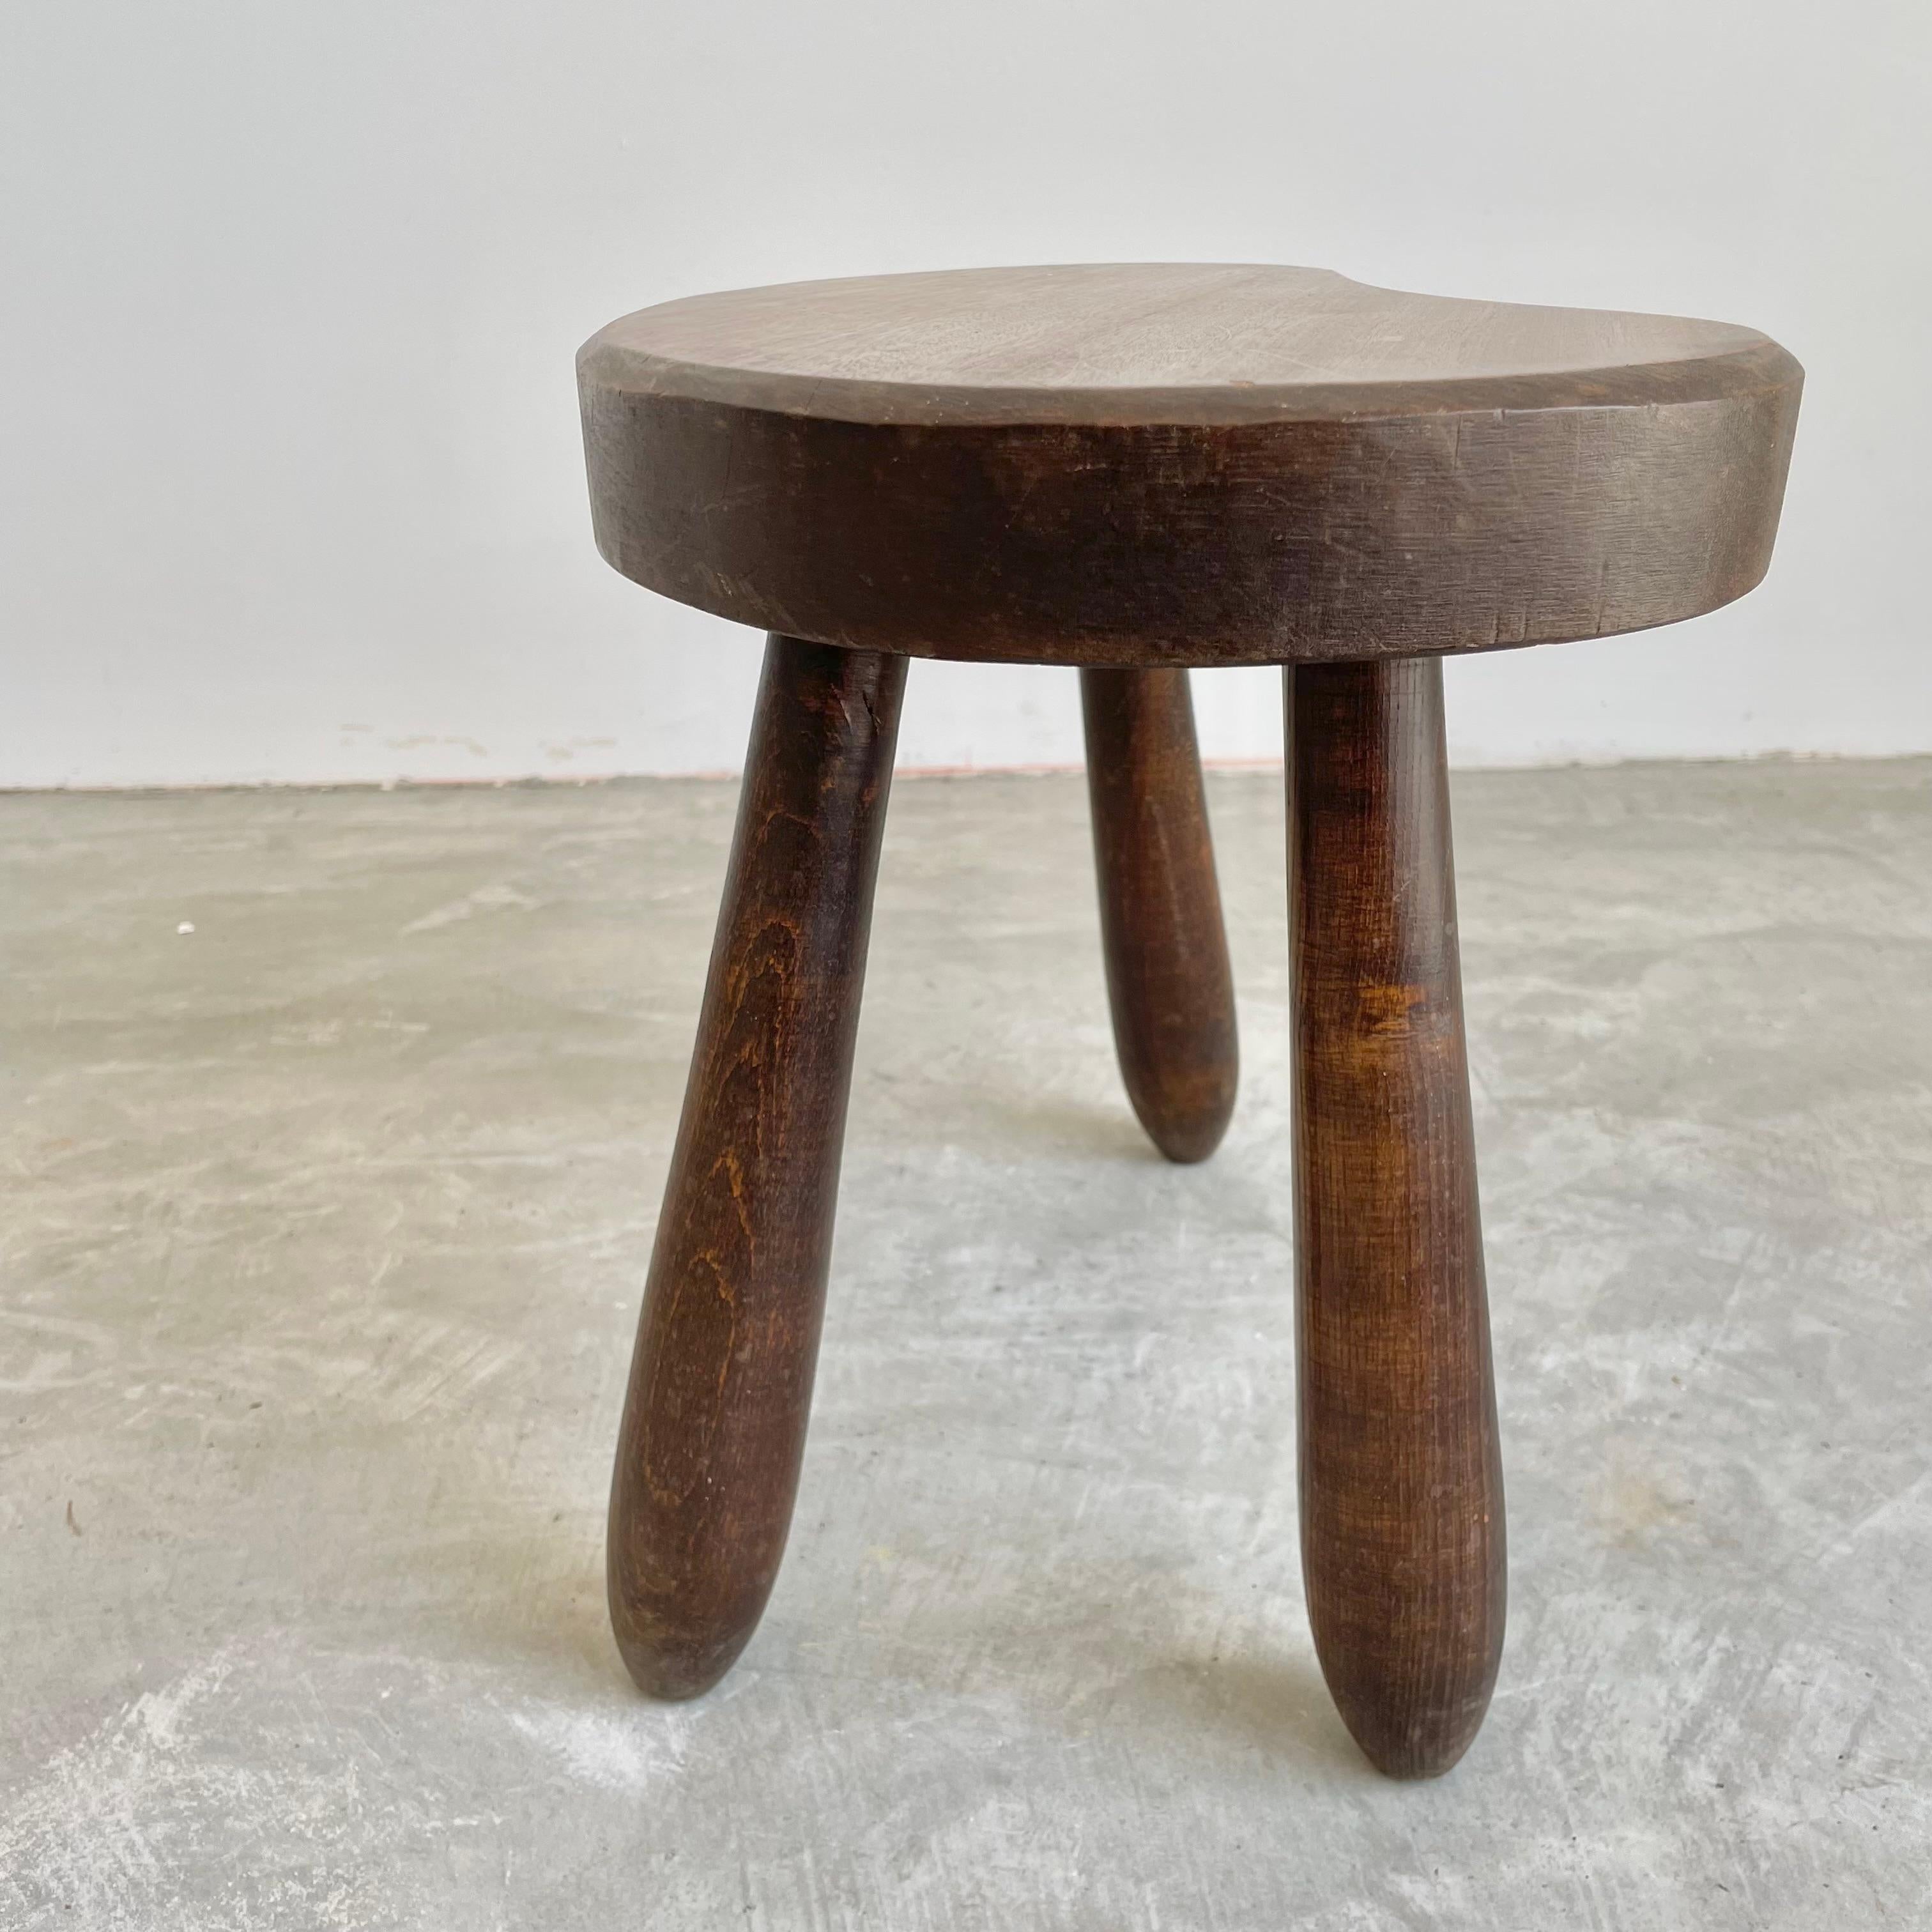 Beautiful wooden stool made in France, circa 1950s. Substantial and chunky, this stool has beautiful lines and solid craftsmanship to club legs. Great patina and grain to the wood. Excellent petite shape. Perfect for books or objects.
 